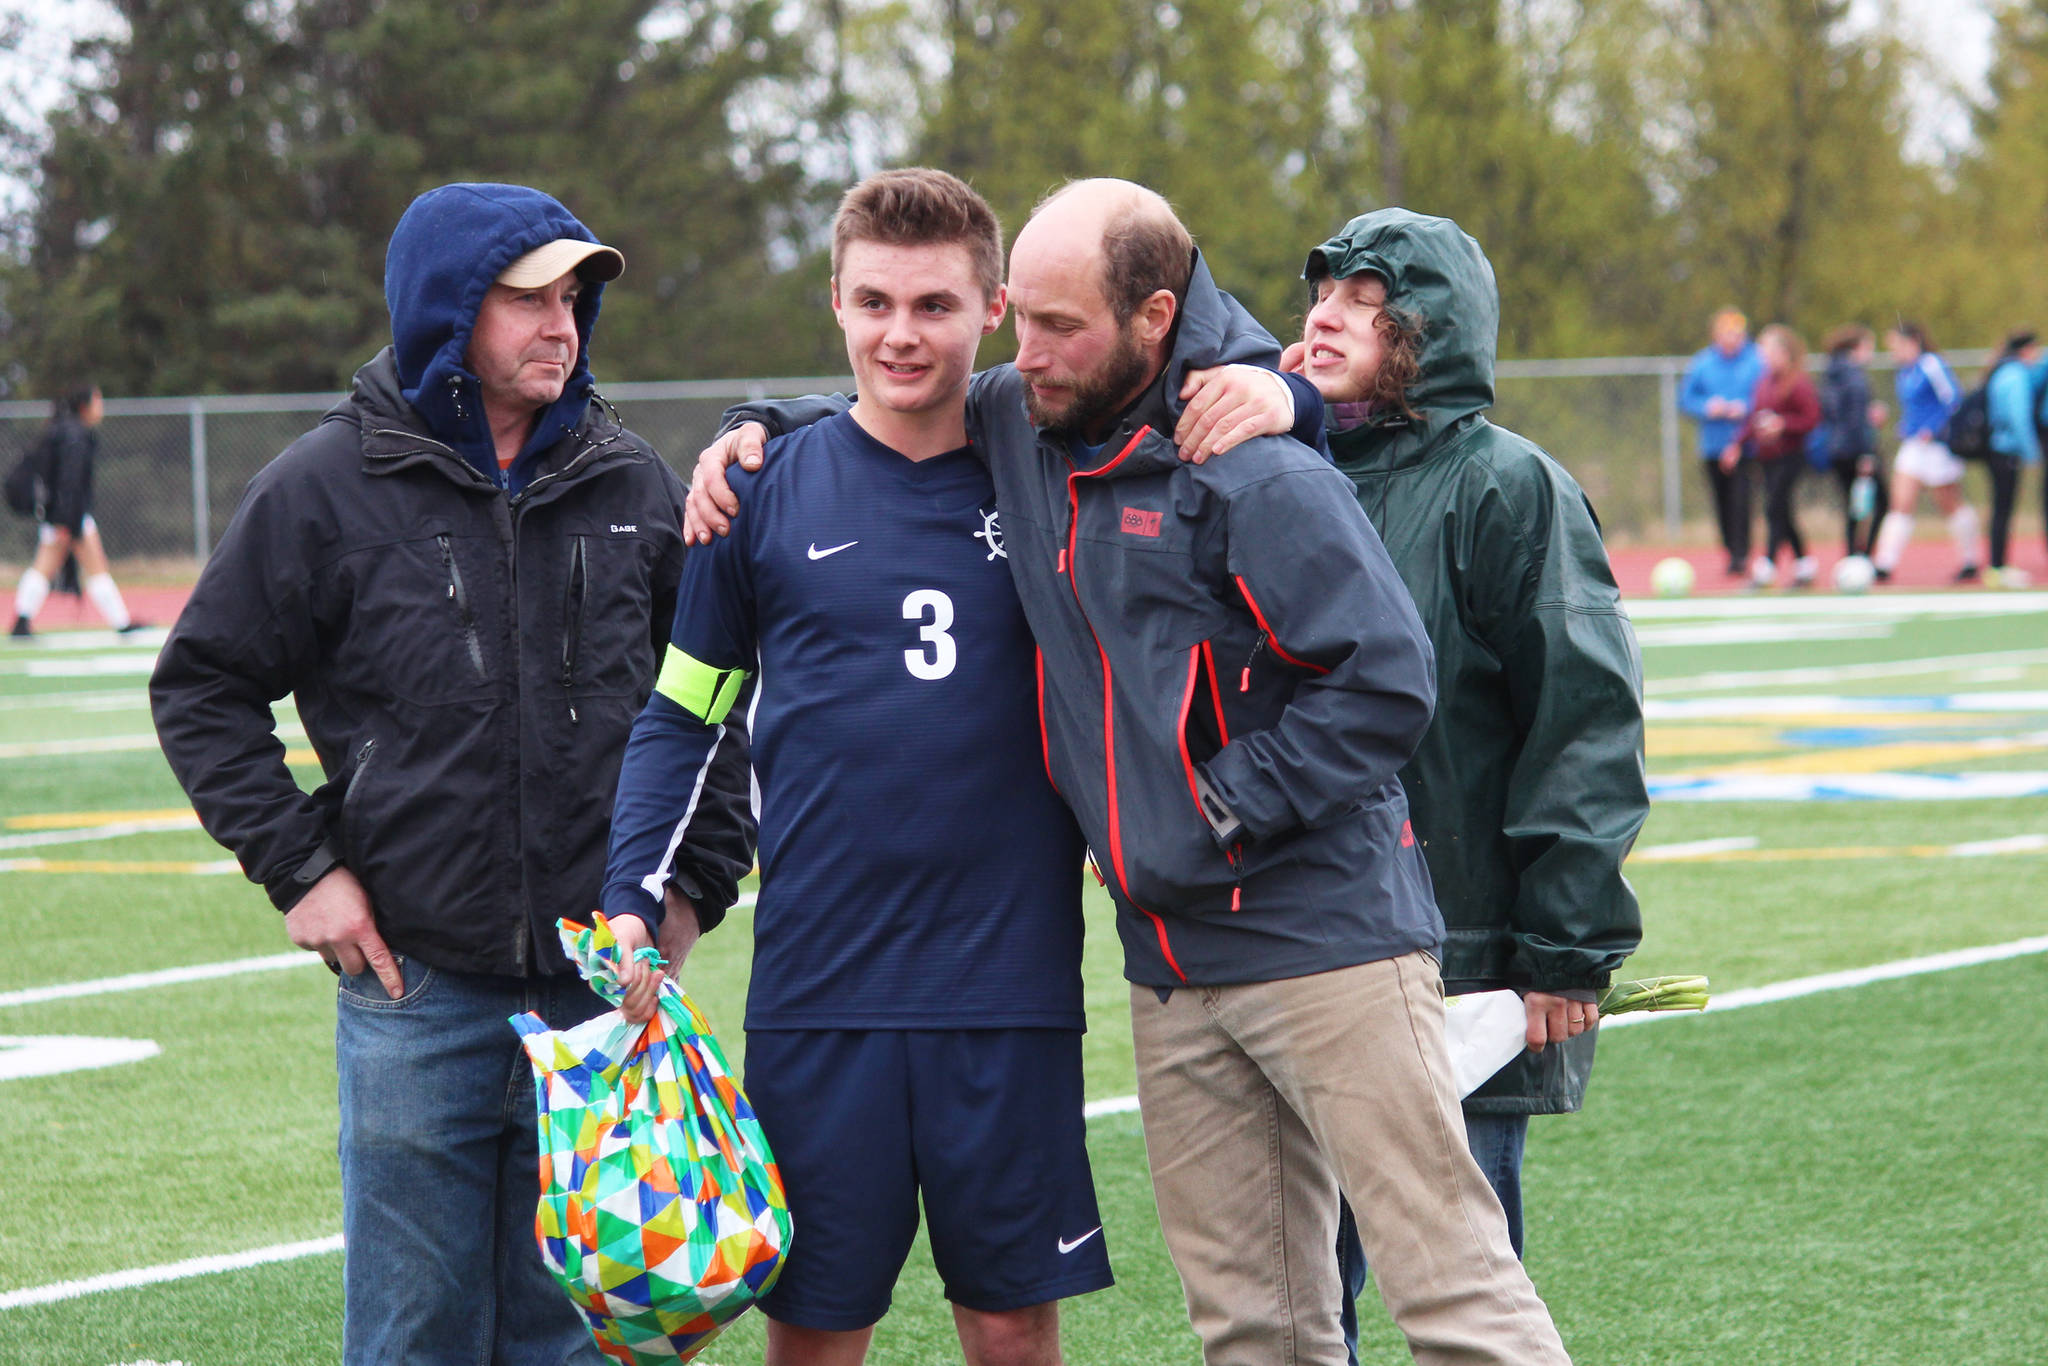 Defender Dexter Lowe celebrates with his parents while being recognized during Senior Night between the boys and girls soccer games Friday, May 10, 2019 at Homer High School in Homer, Alaska. (Photo by Megan Pacer/Homer News)